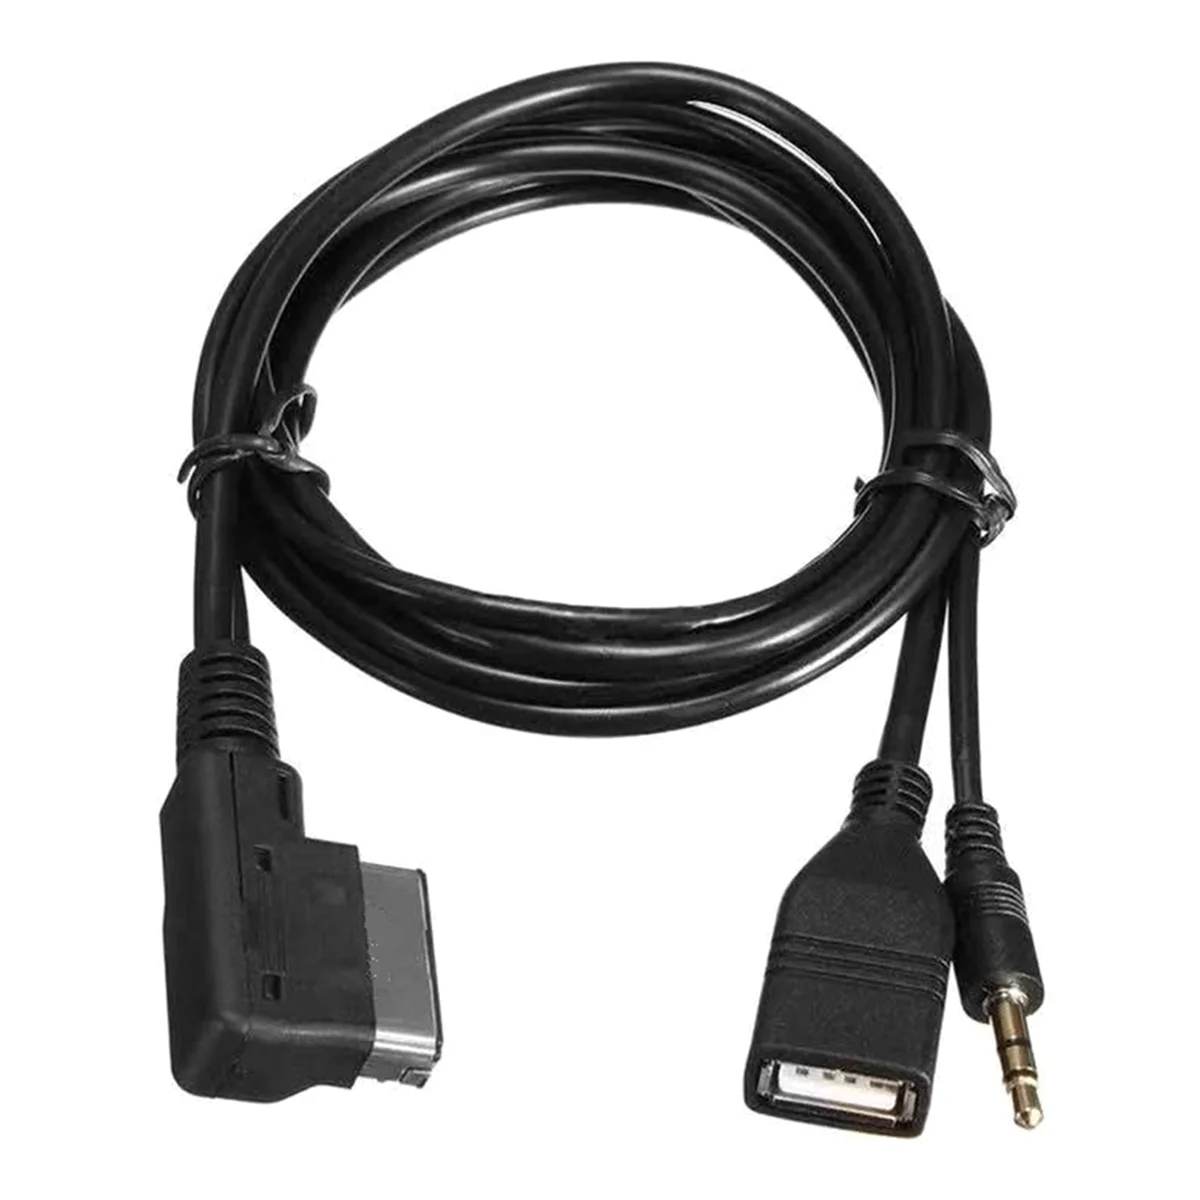 

Car Audio Cable USB Car Conversion Cable for A1 A3 A4L A5 A6L A8 Q3 Q5 Q7 TT with AMI Interface with MDI-BOX Interface